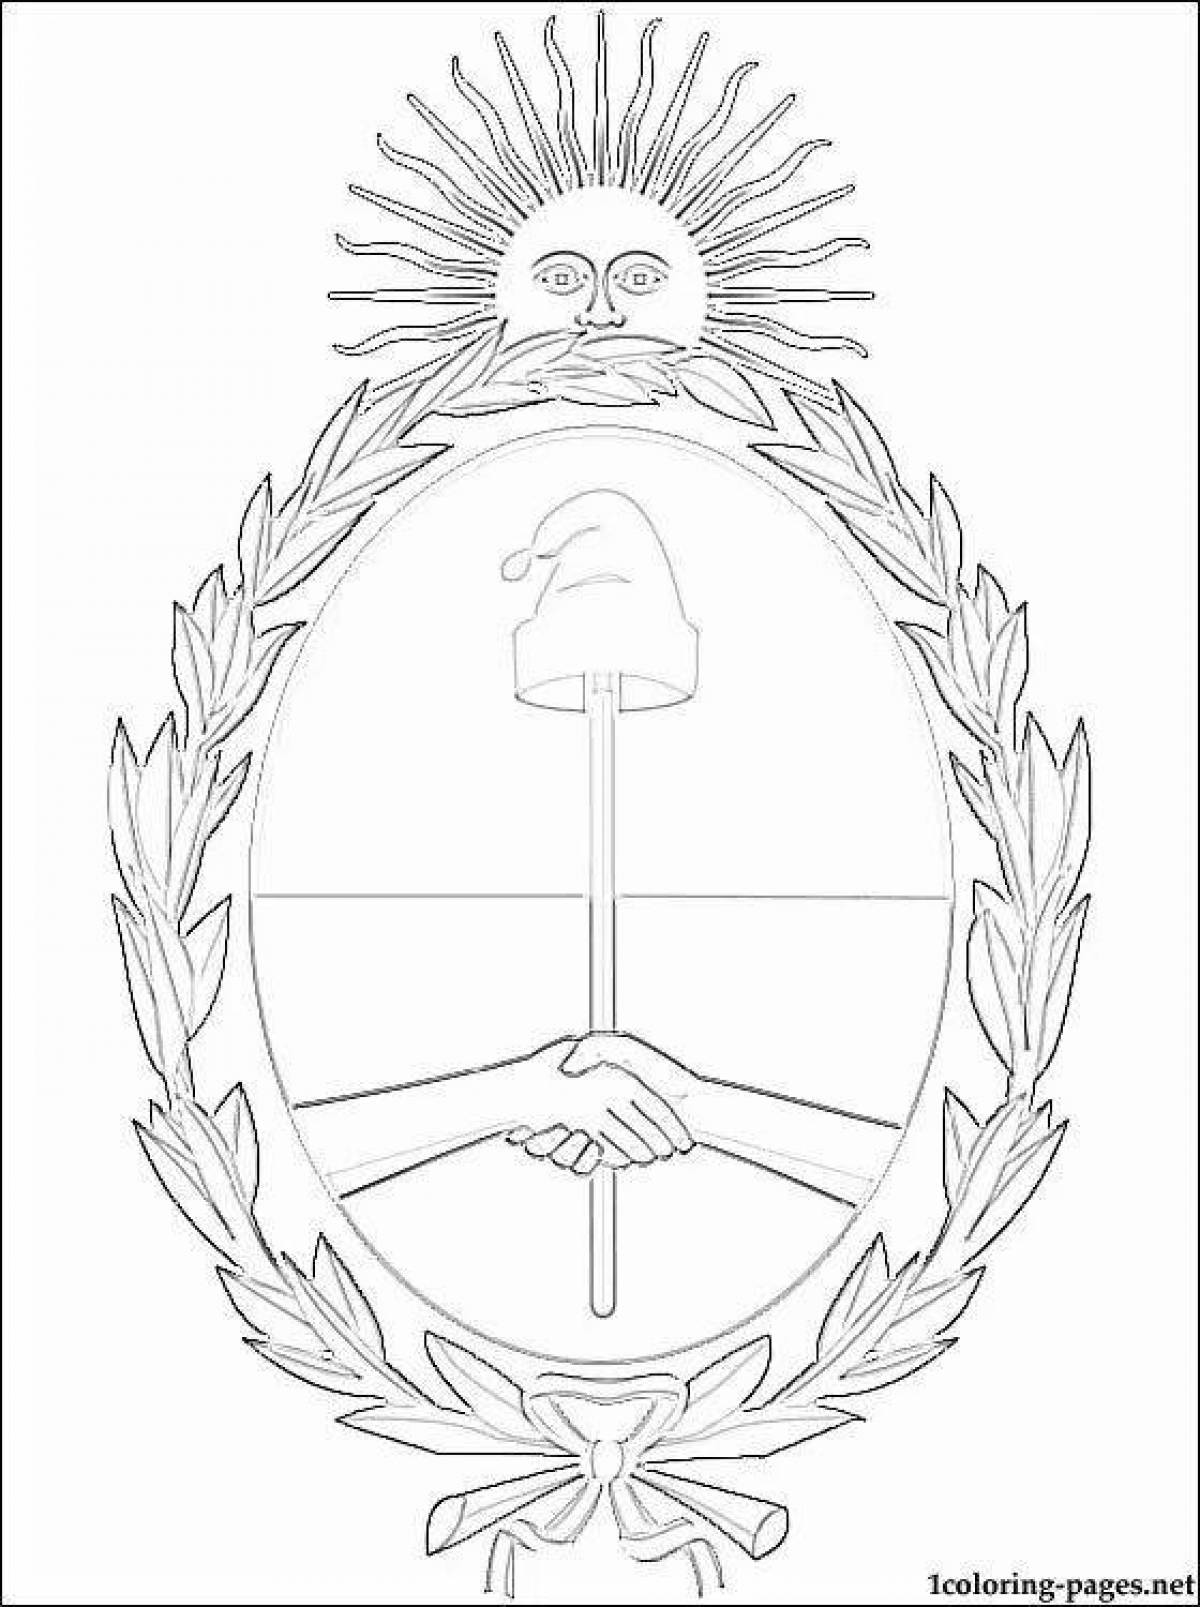 Adorable argentina flag coloring page